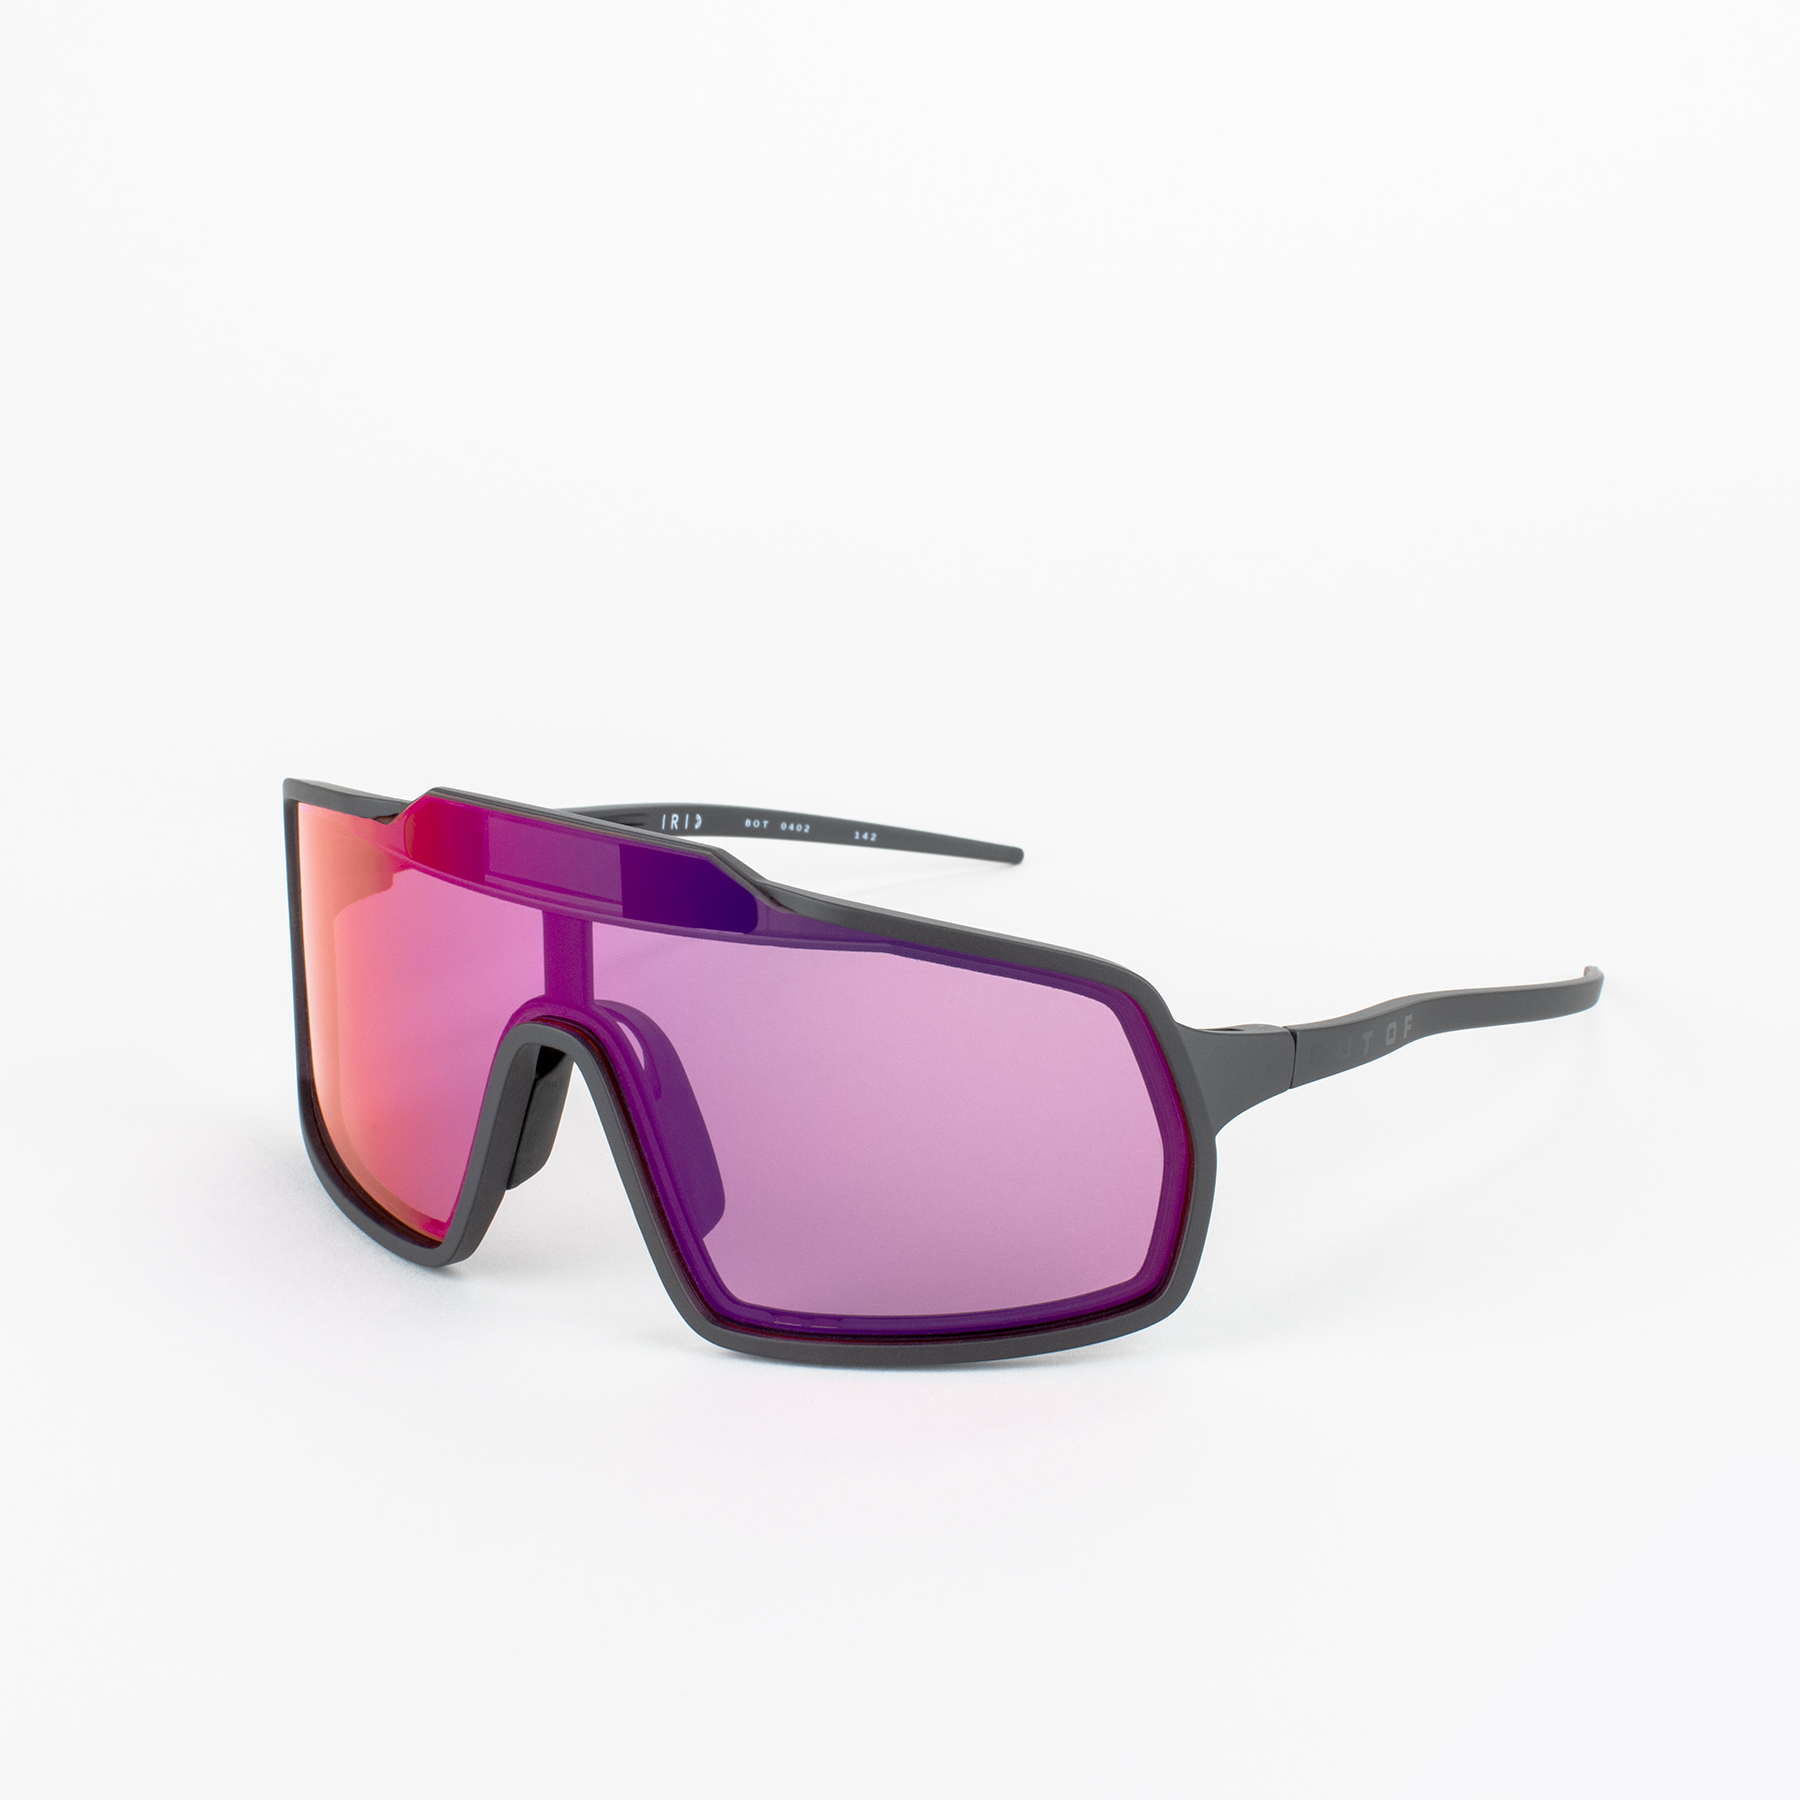 Bot 2 electronic sunglasses with IRID red lens